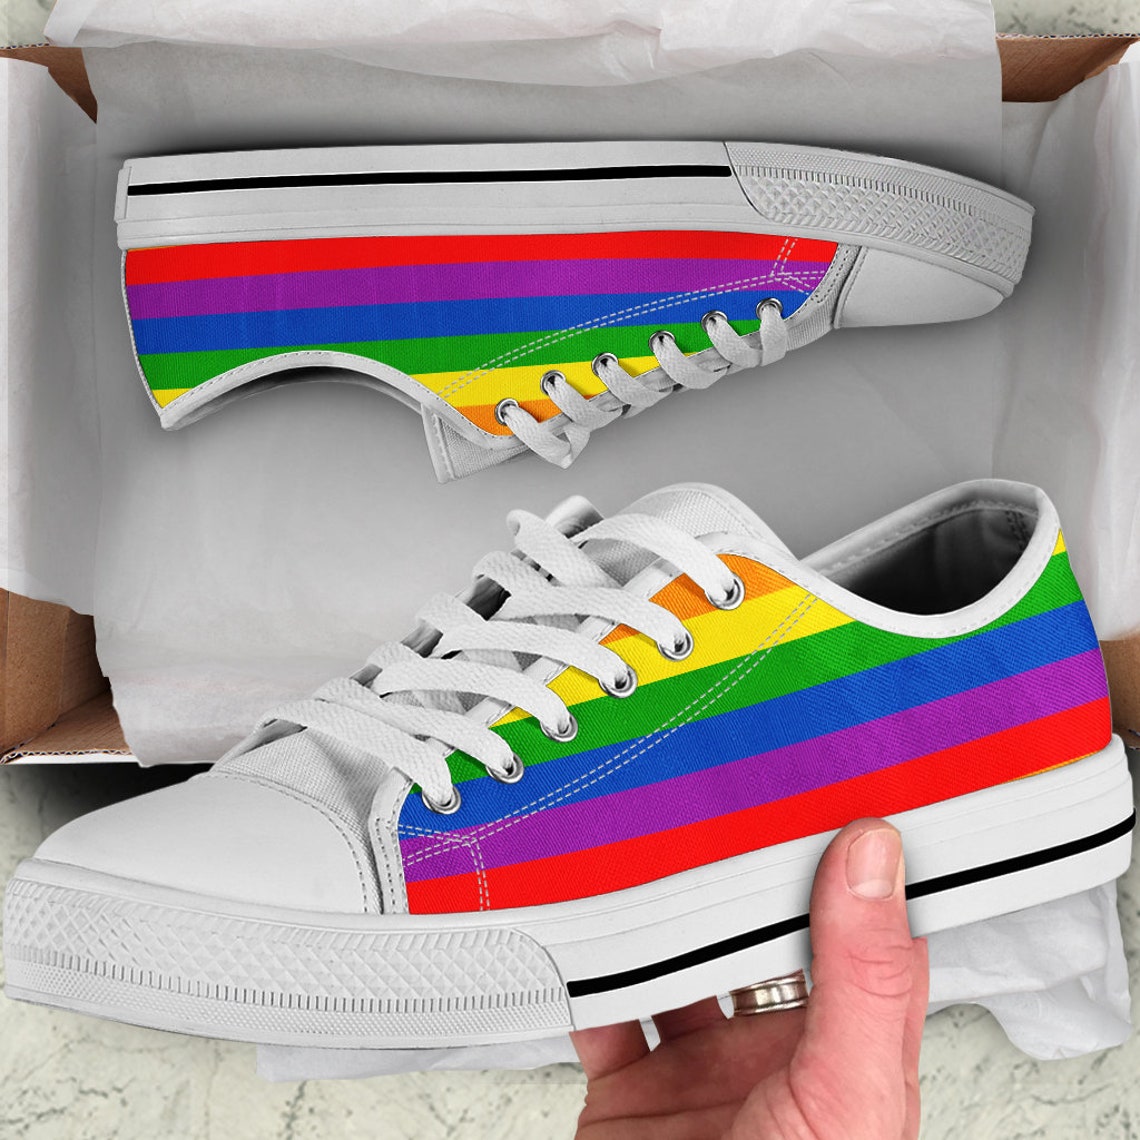 Rainbow striped sneakers gay pride shoes LGBT wedding shoes | Etsy